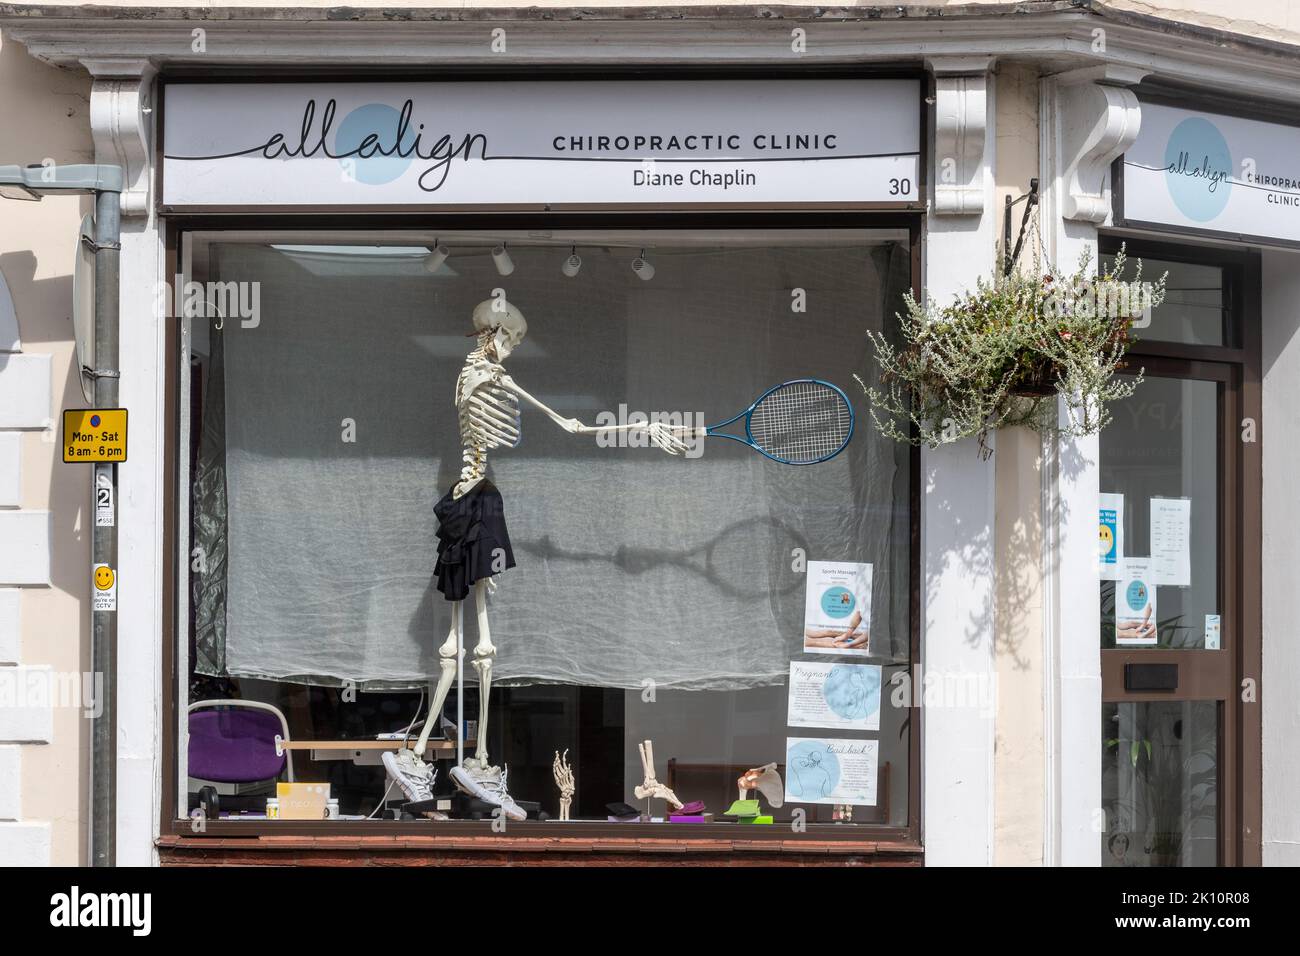 Chiropractic clinic quirky shop window display with a skeleton holding a tennis racket, Liss, Hampshire, England, UK Stock Photo